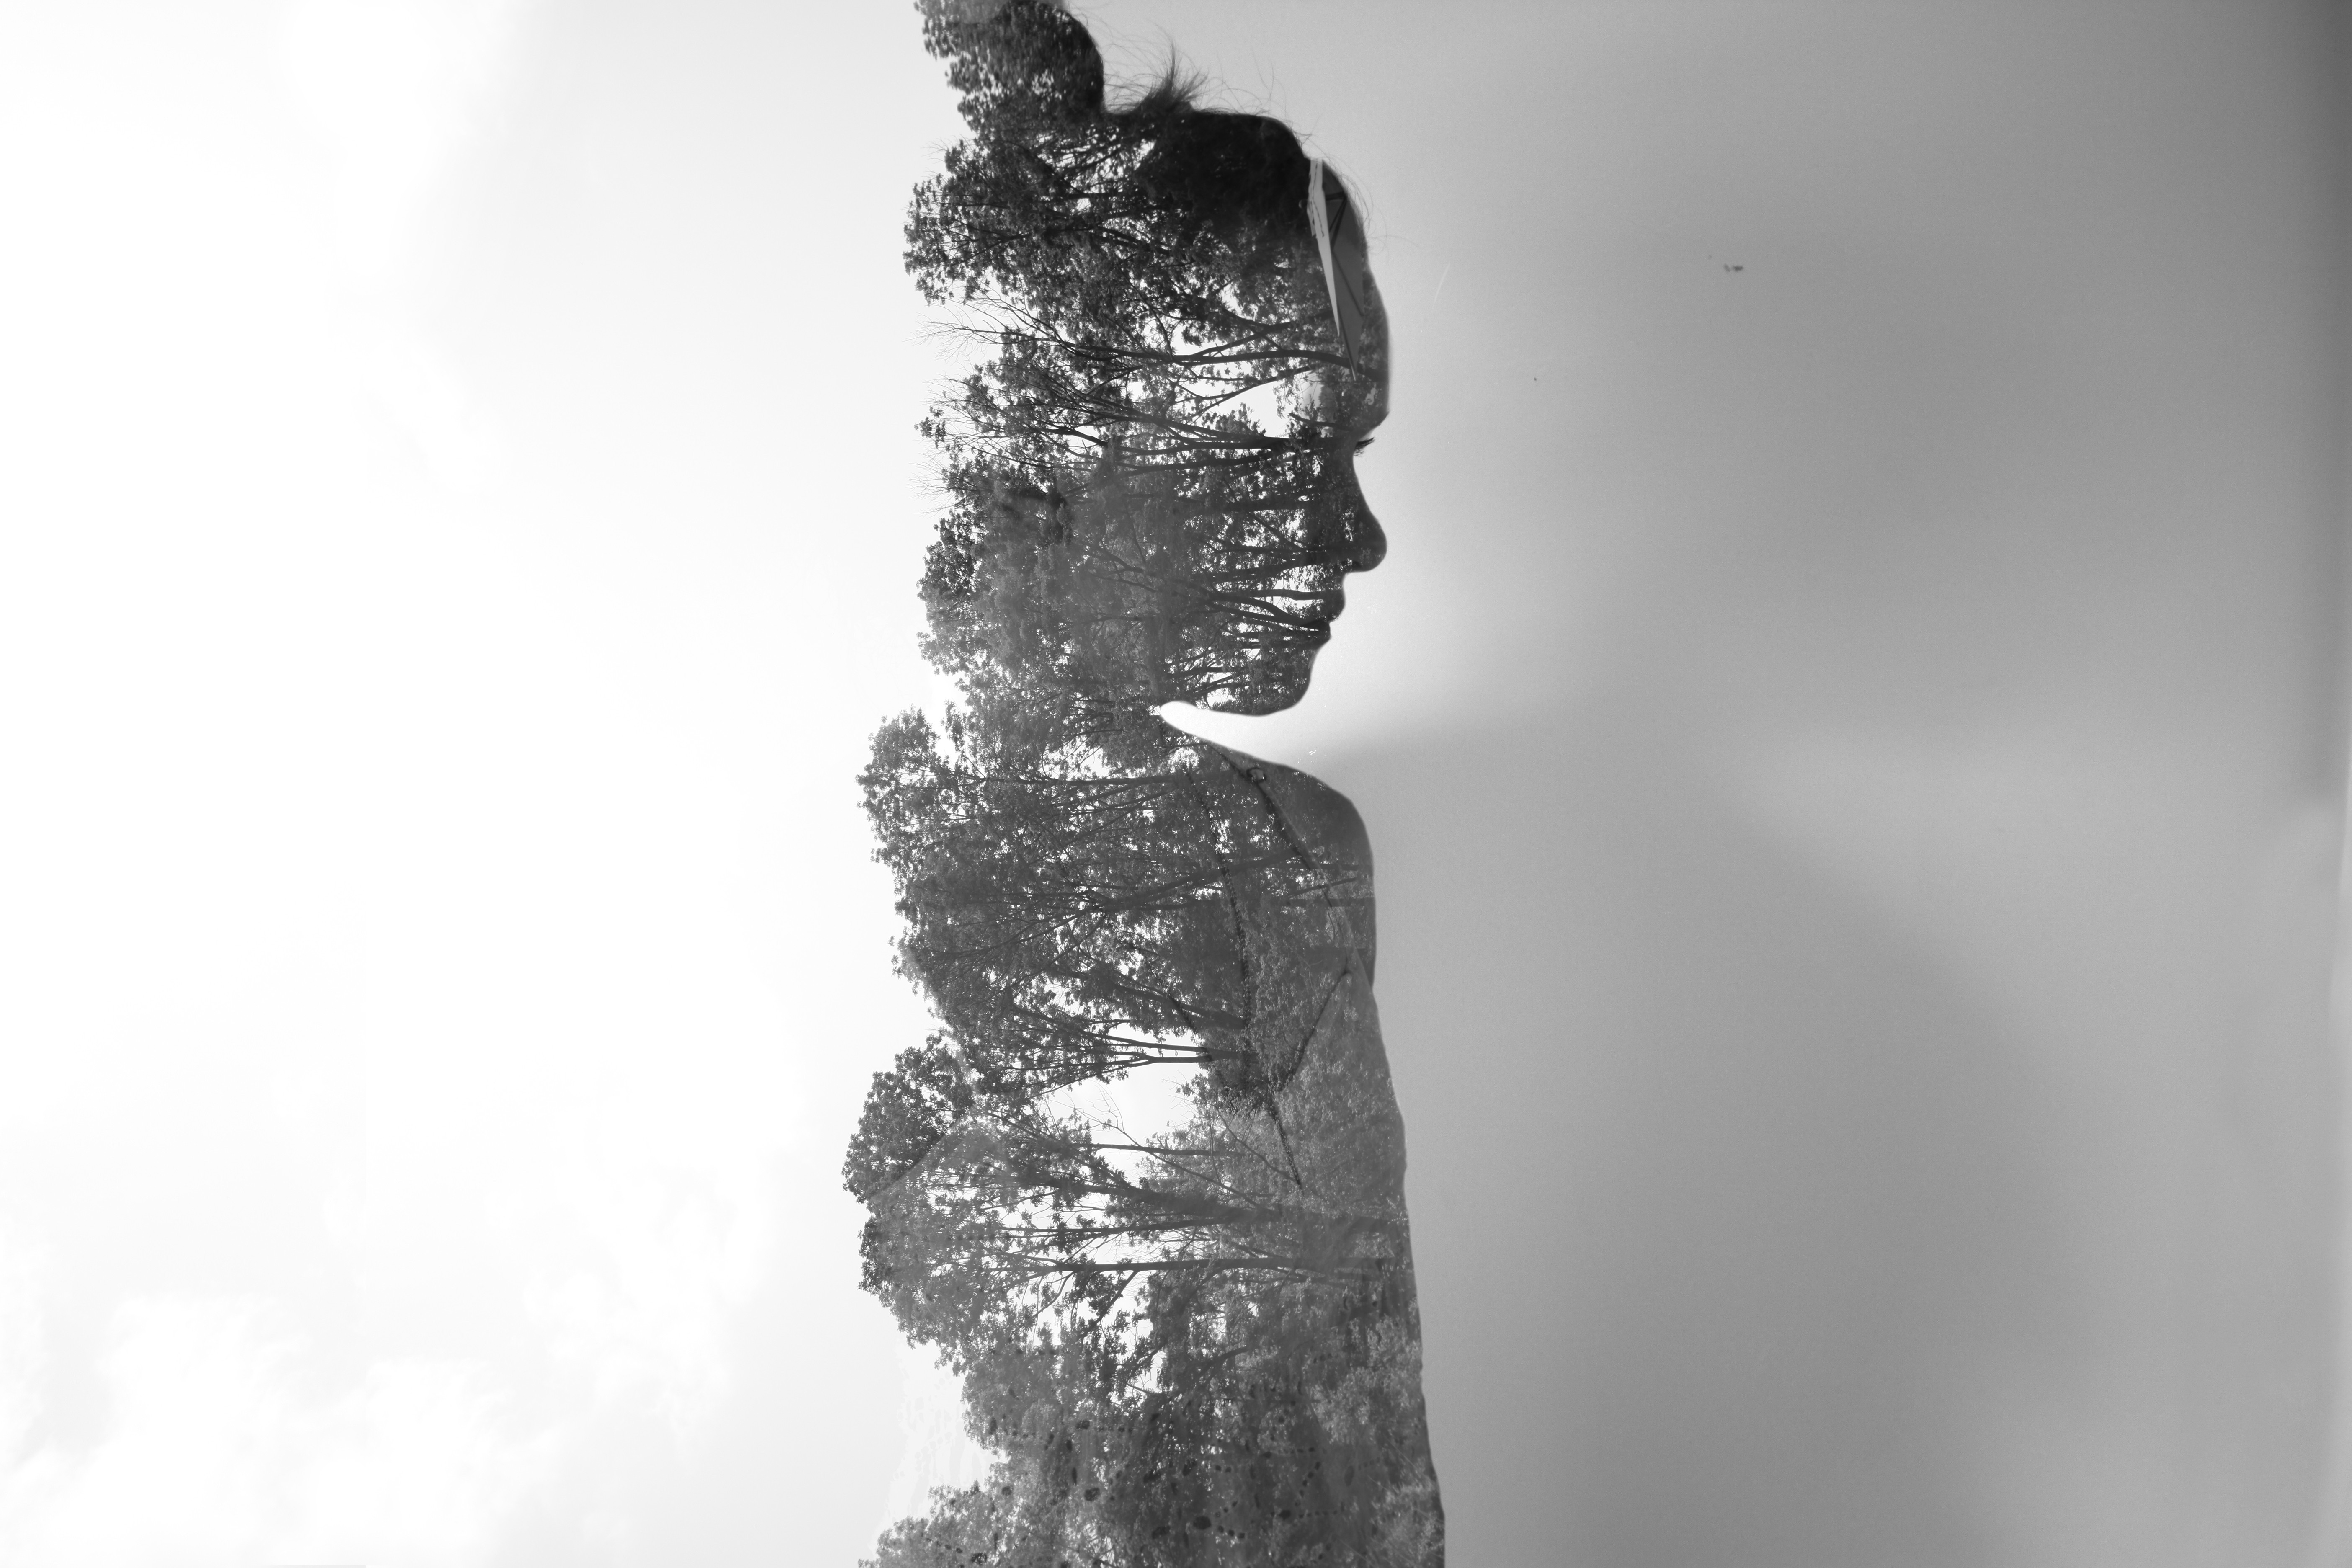 double exposure wallpaper,white,black and white,monochrome photography,sculpture,water